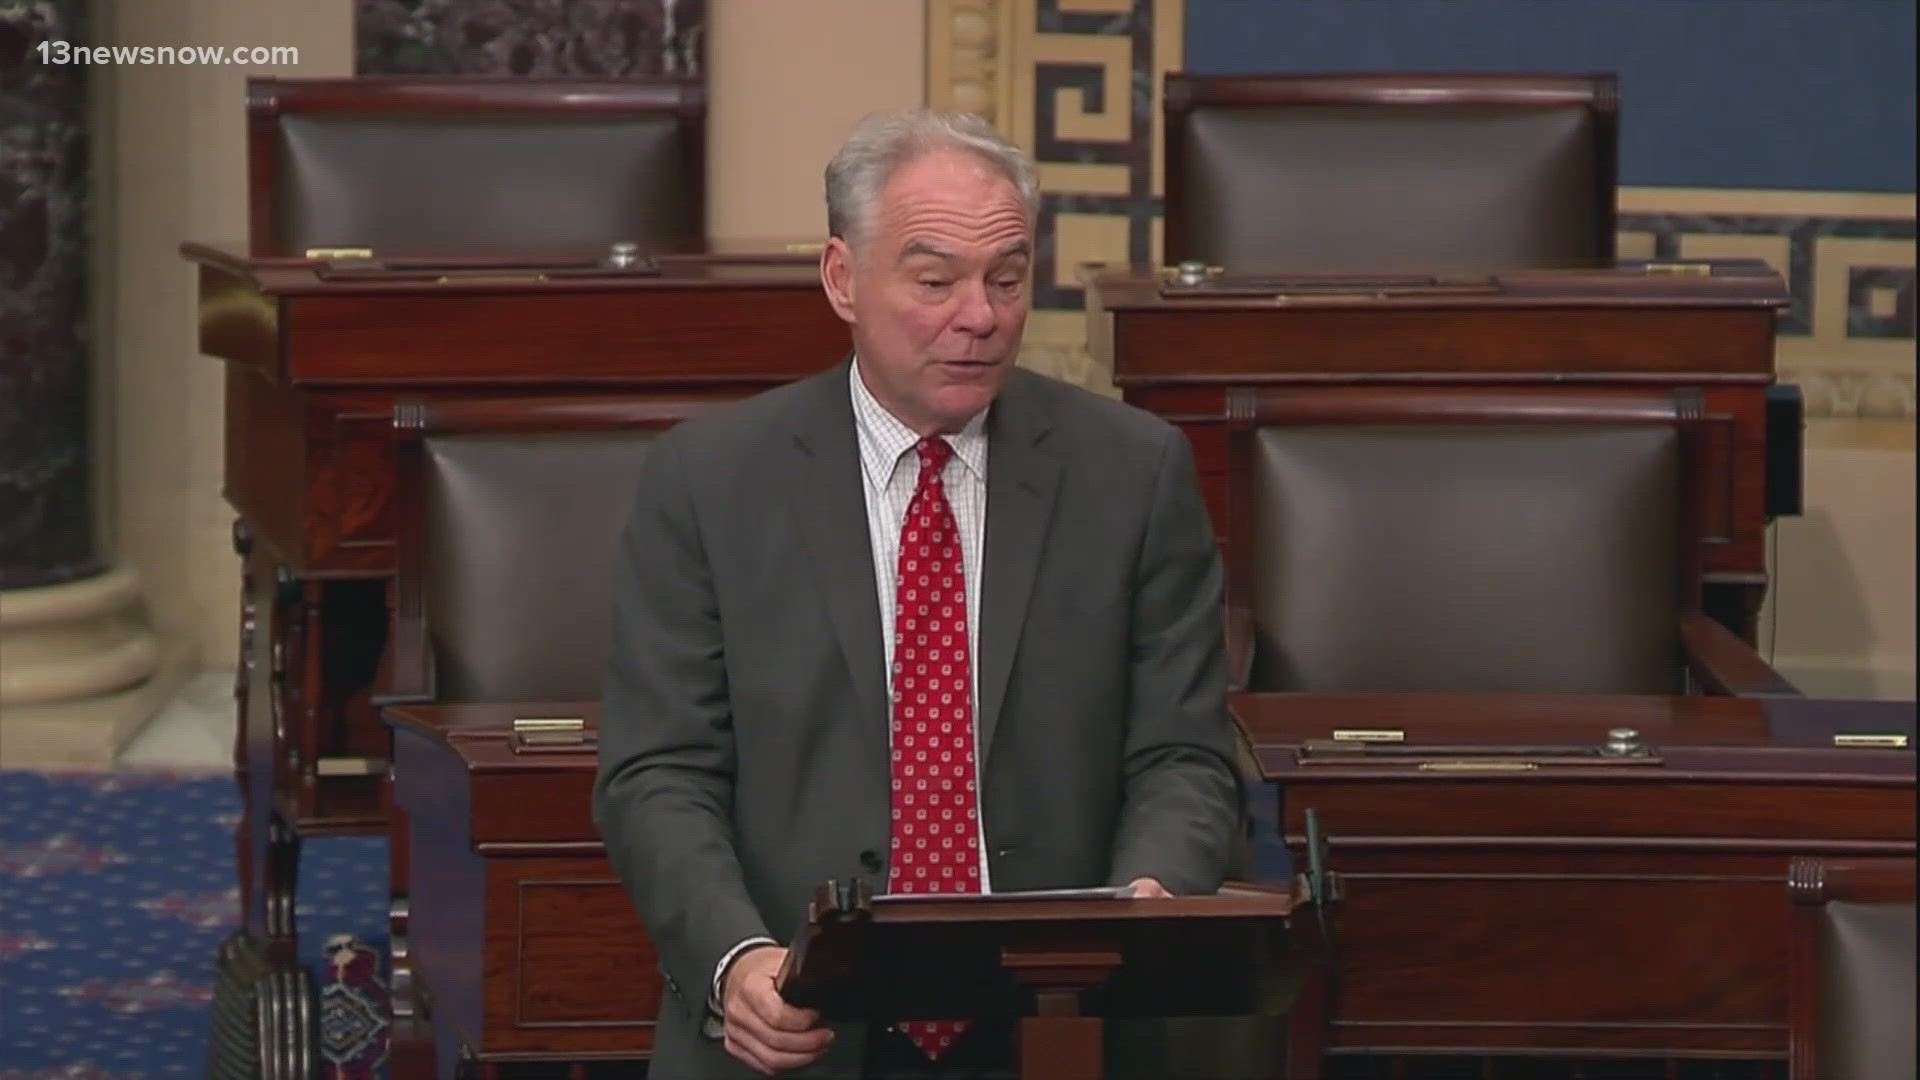 Sen. Kaine said he’s received hundreds of letters from Virginians, voicing concerns about the shutdown. Wednesday, he read some of those letters on the Senate floor.